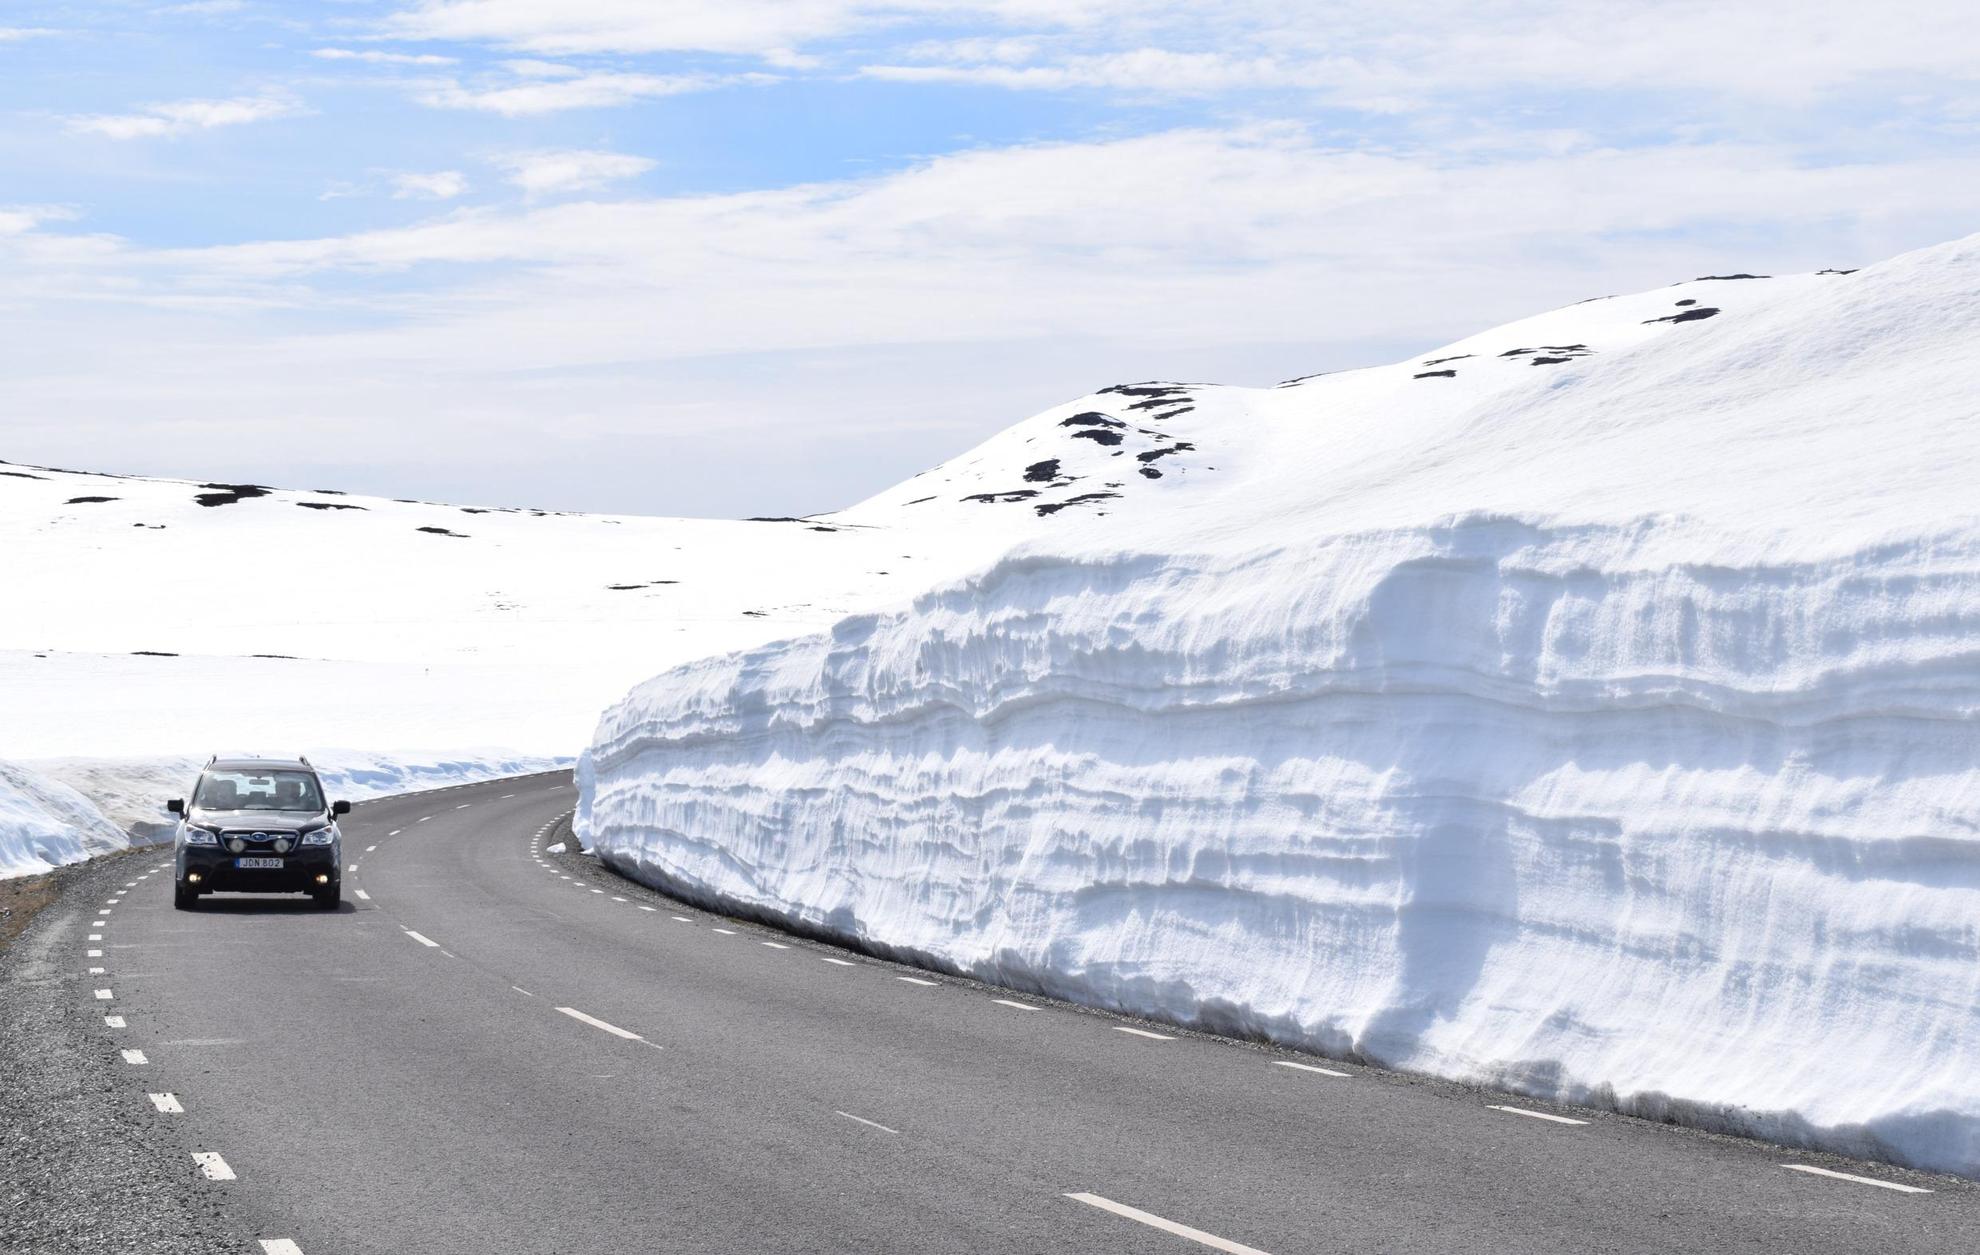 A car is driving on a road surrounded by high snow banks.